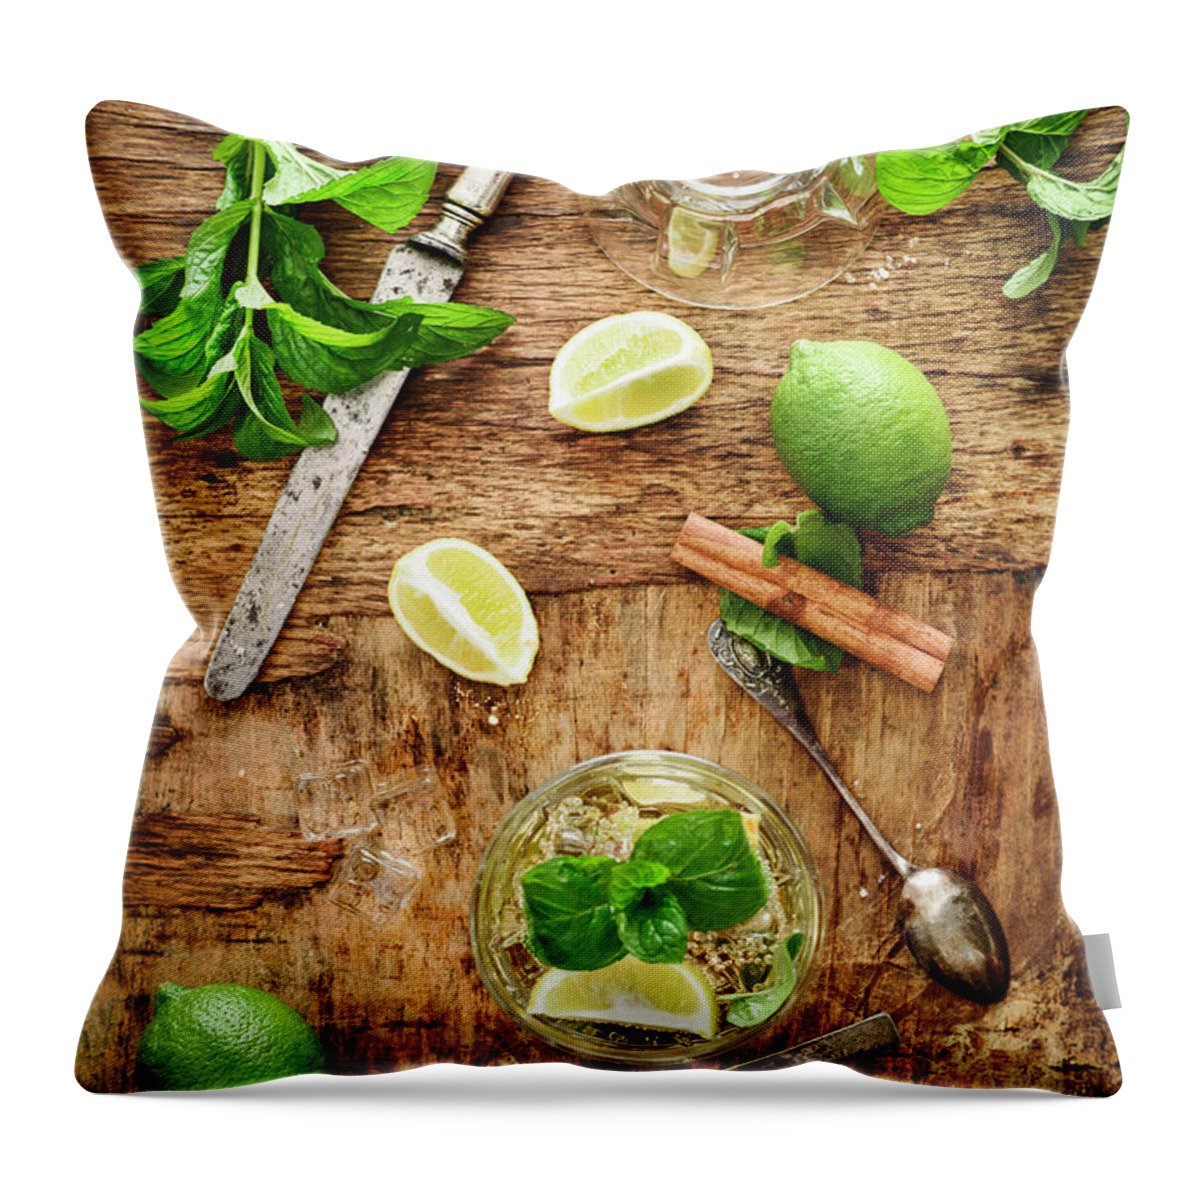 Mojito Throw Pillow featuring the photograph Mojito ingredients from above by Jelena Jovanovic